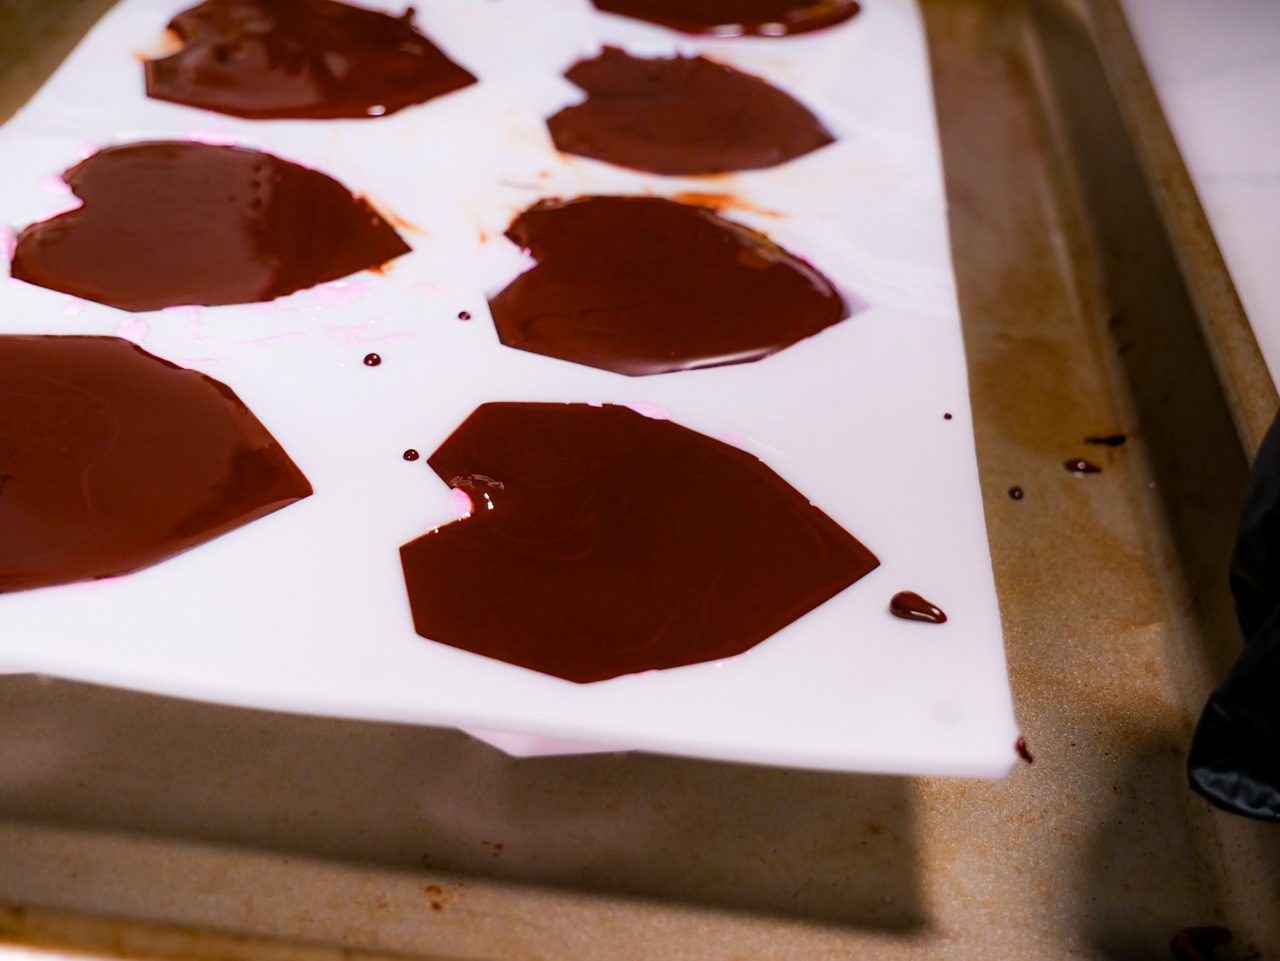 Chocolate poured on top of the fruit jelly and marshmallow fluff in heart-shaped silicone mold.